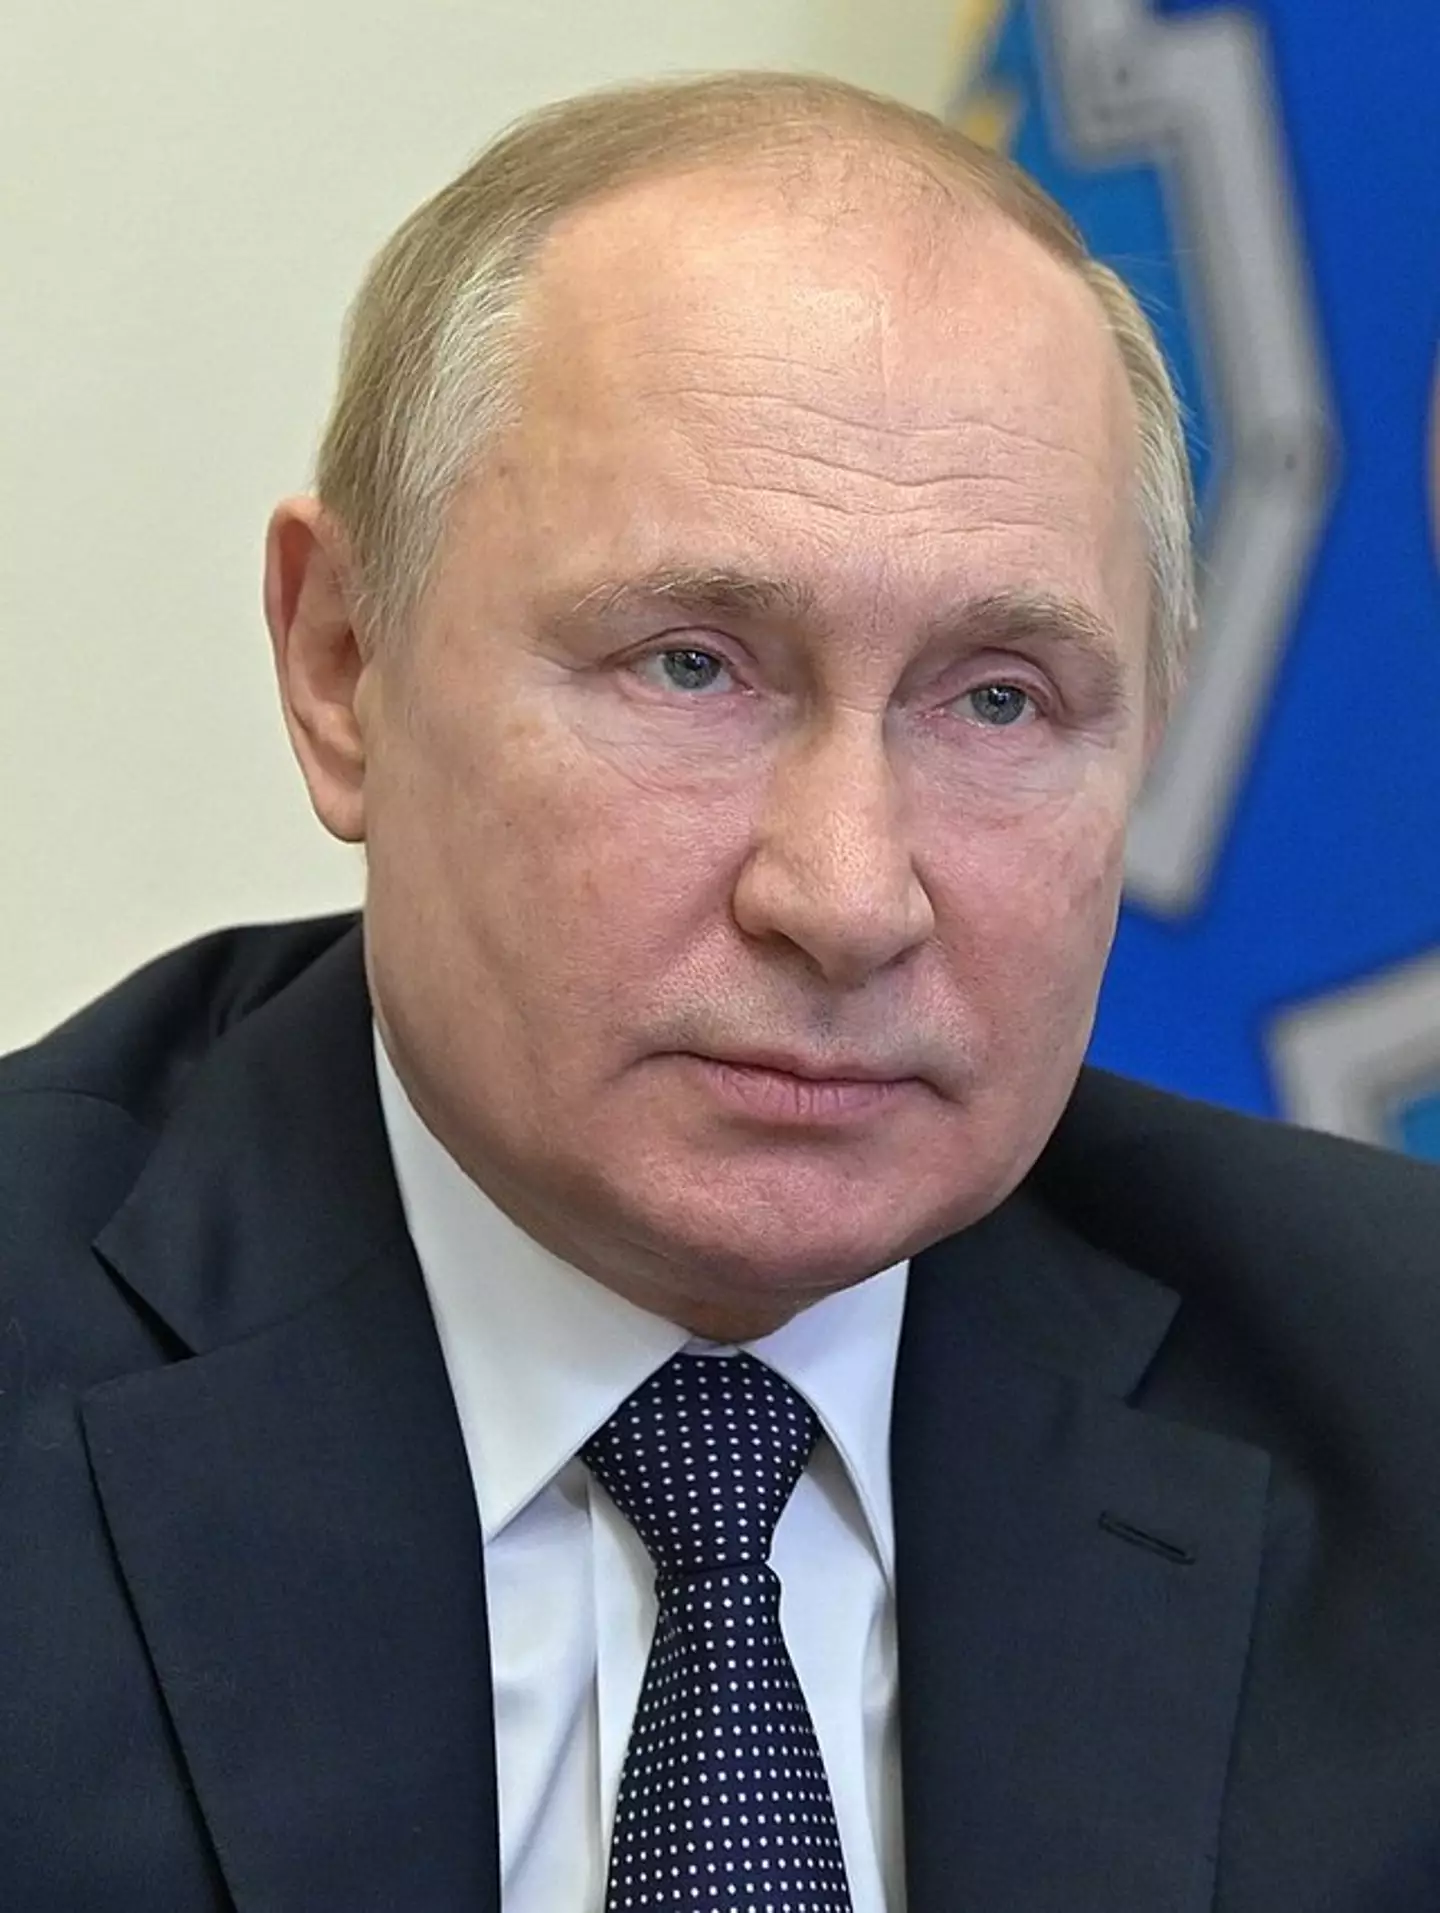 Putin faces allegations relating to the abduction of Ukrainian children.